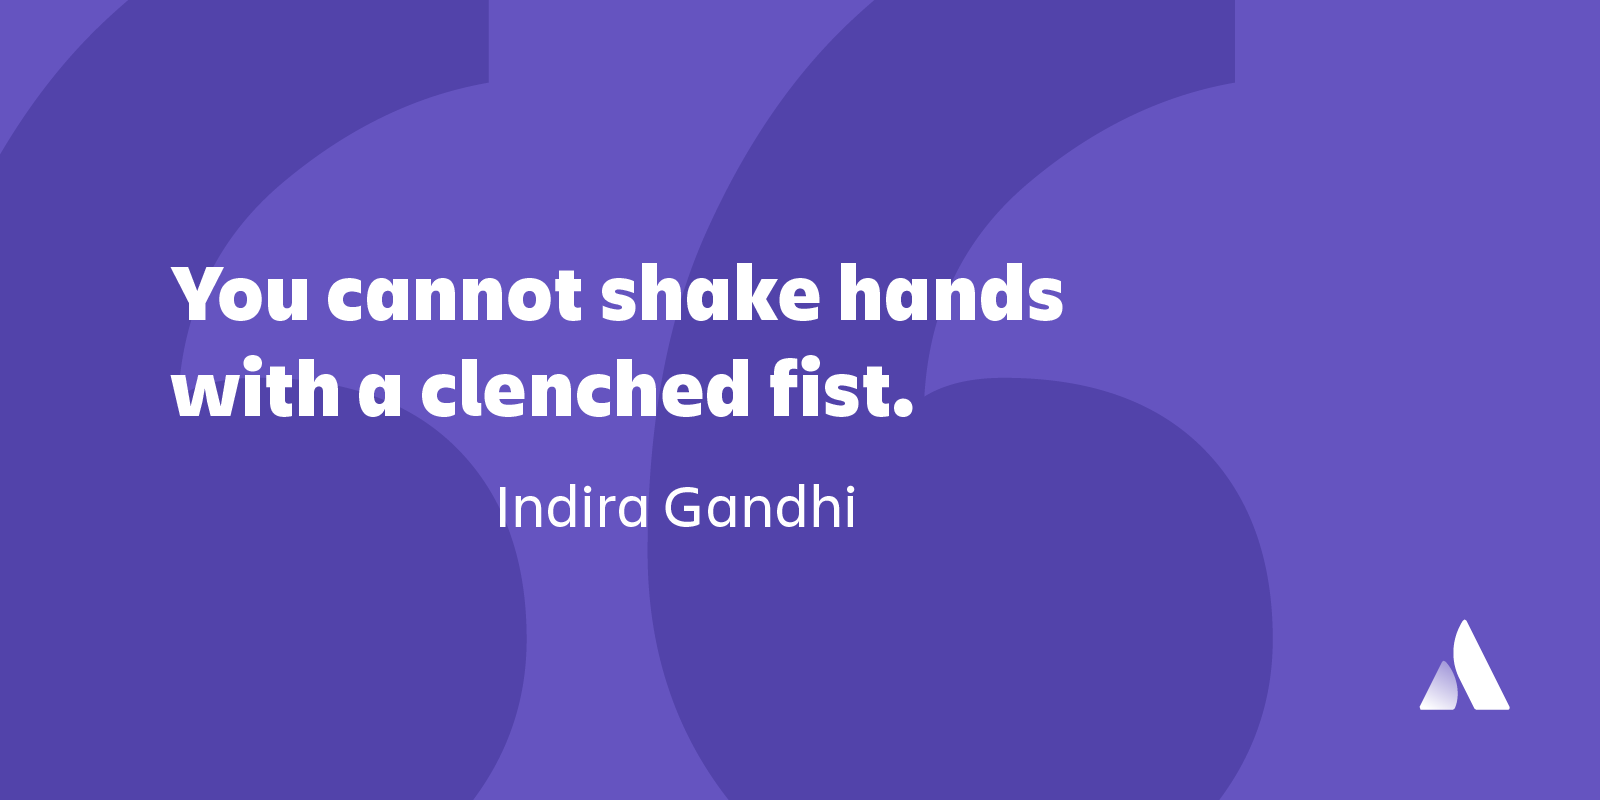 teamwork quote You cannot shake hands with a clenched fist